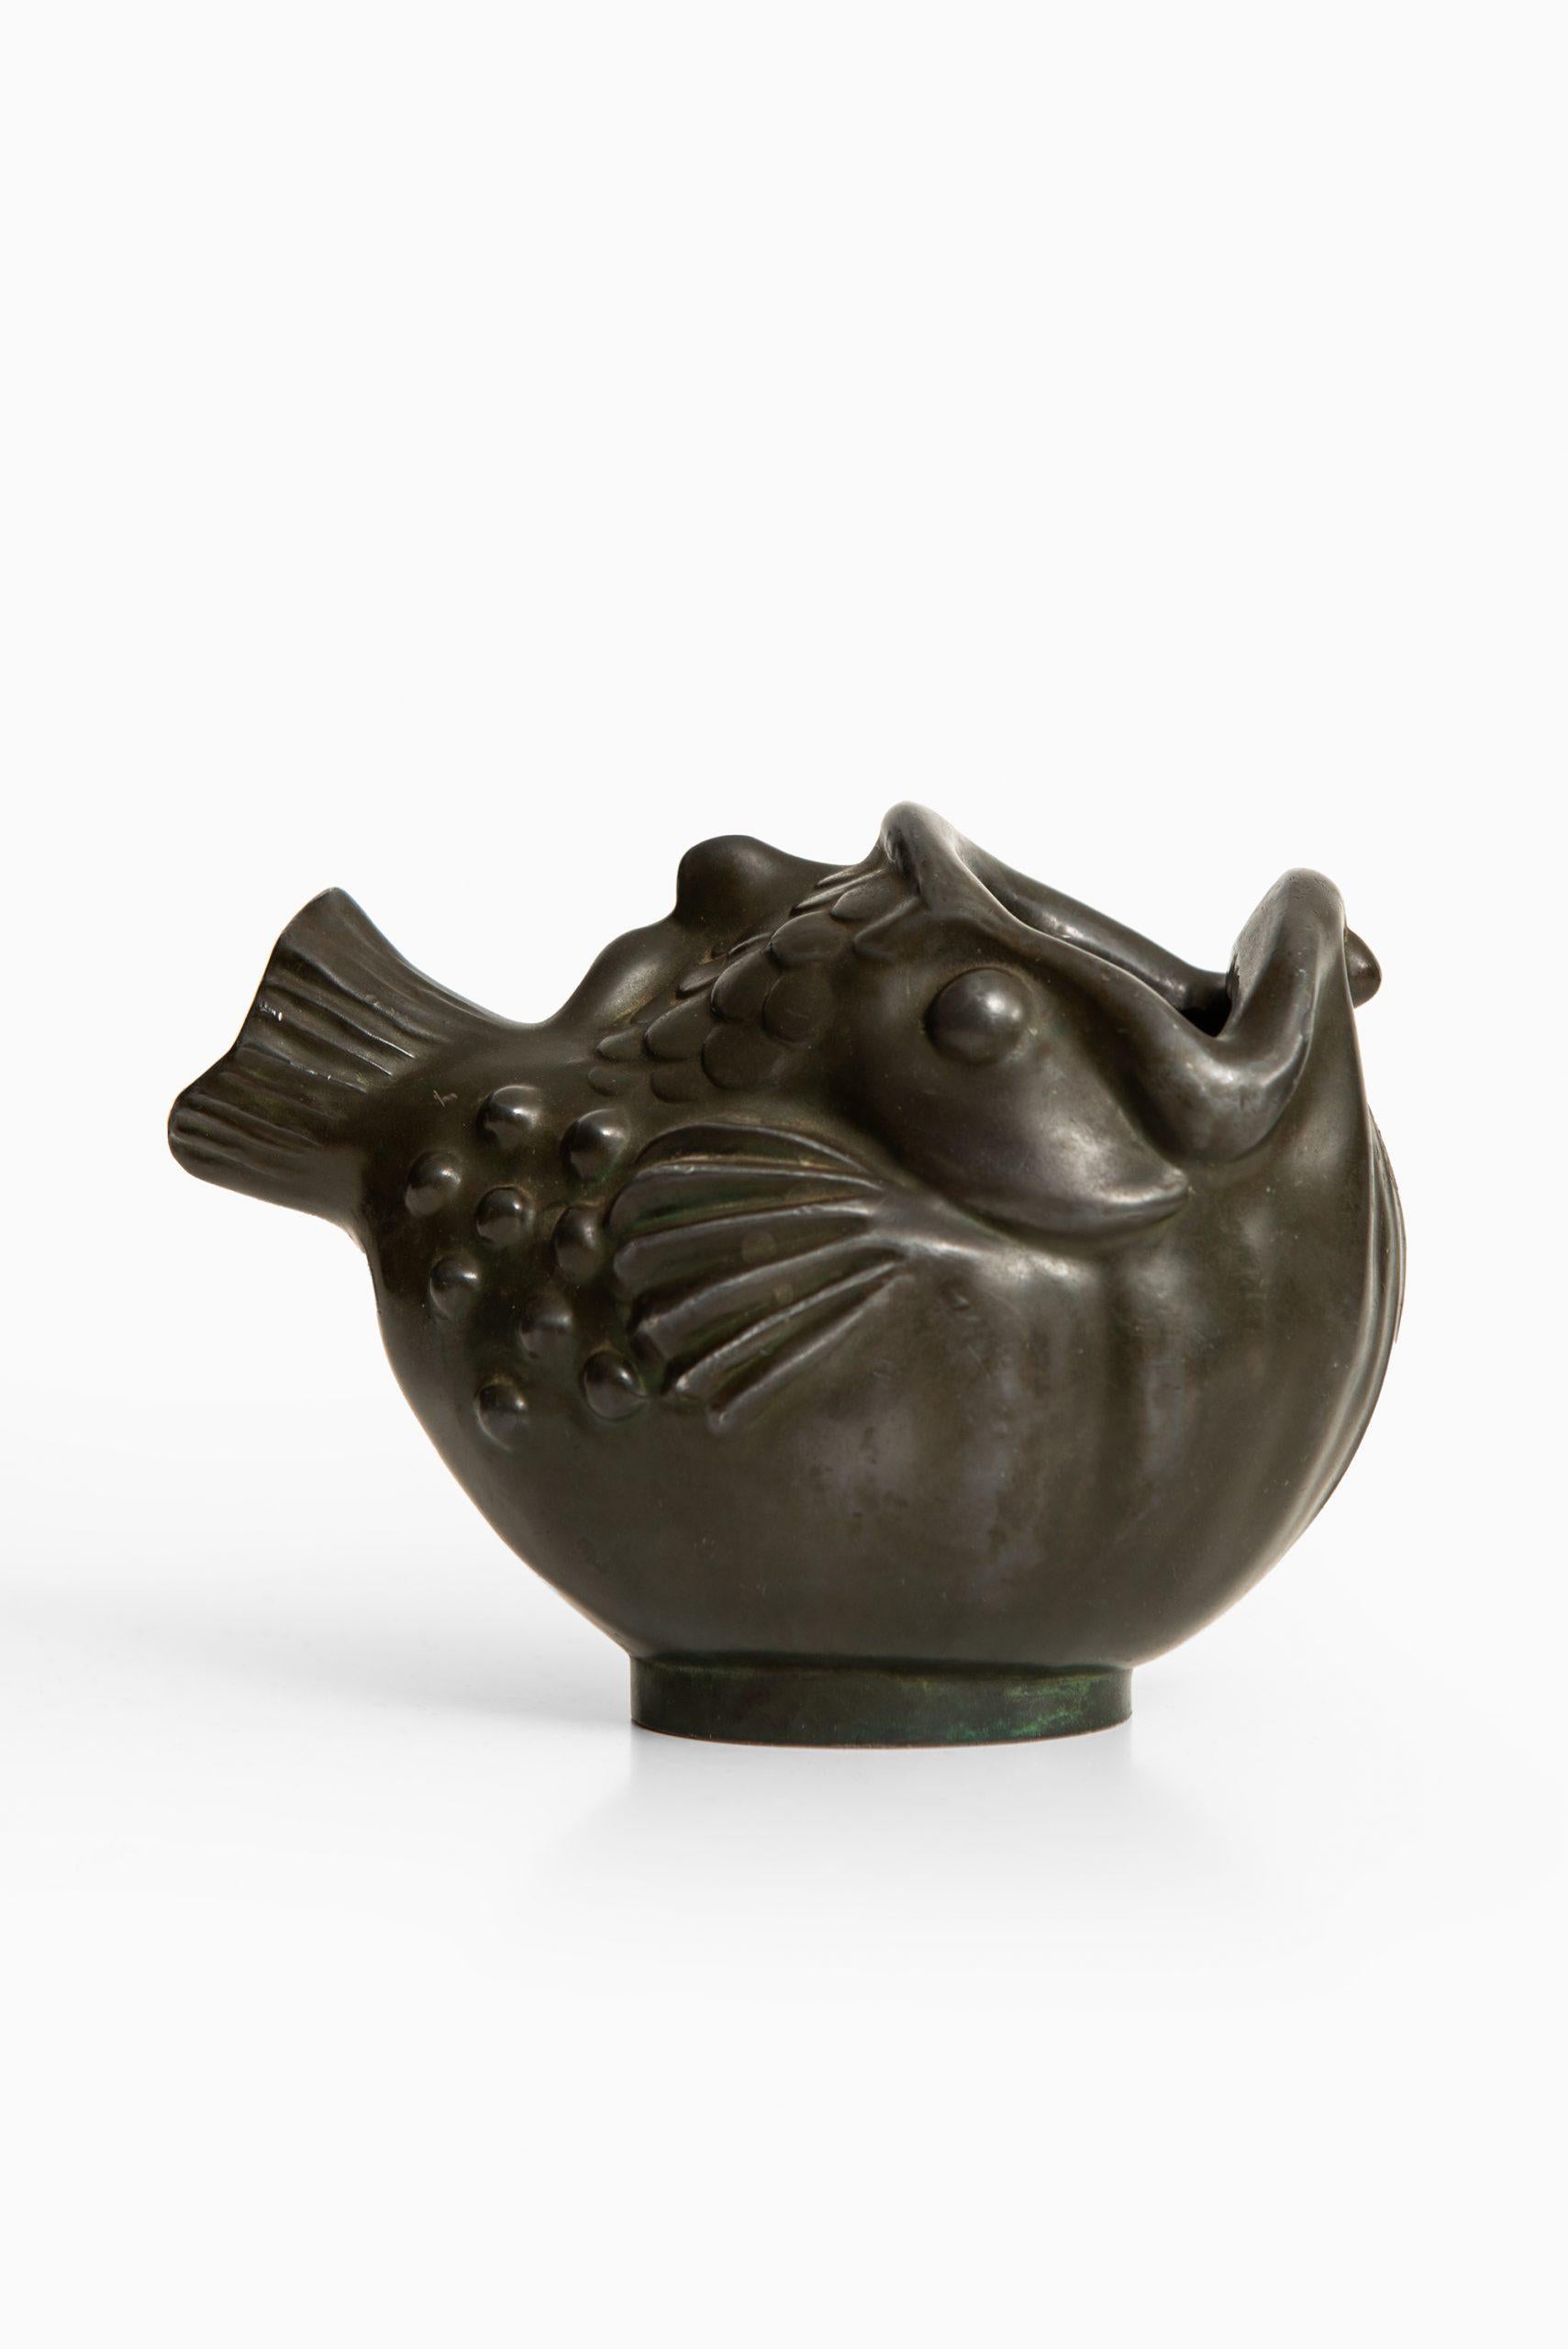 Rare carp fish sculpture by Just Andersen. Produced by Just Andersen in Denmark.